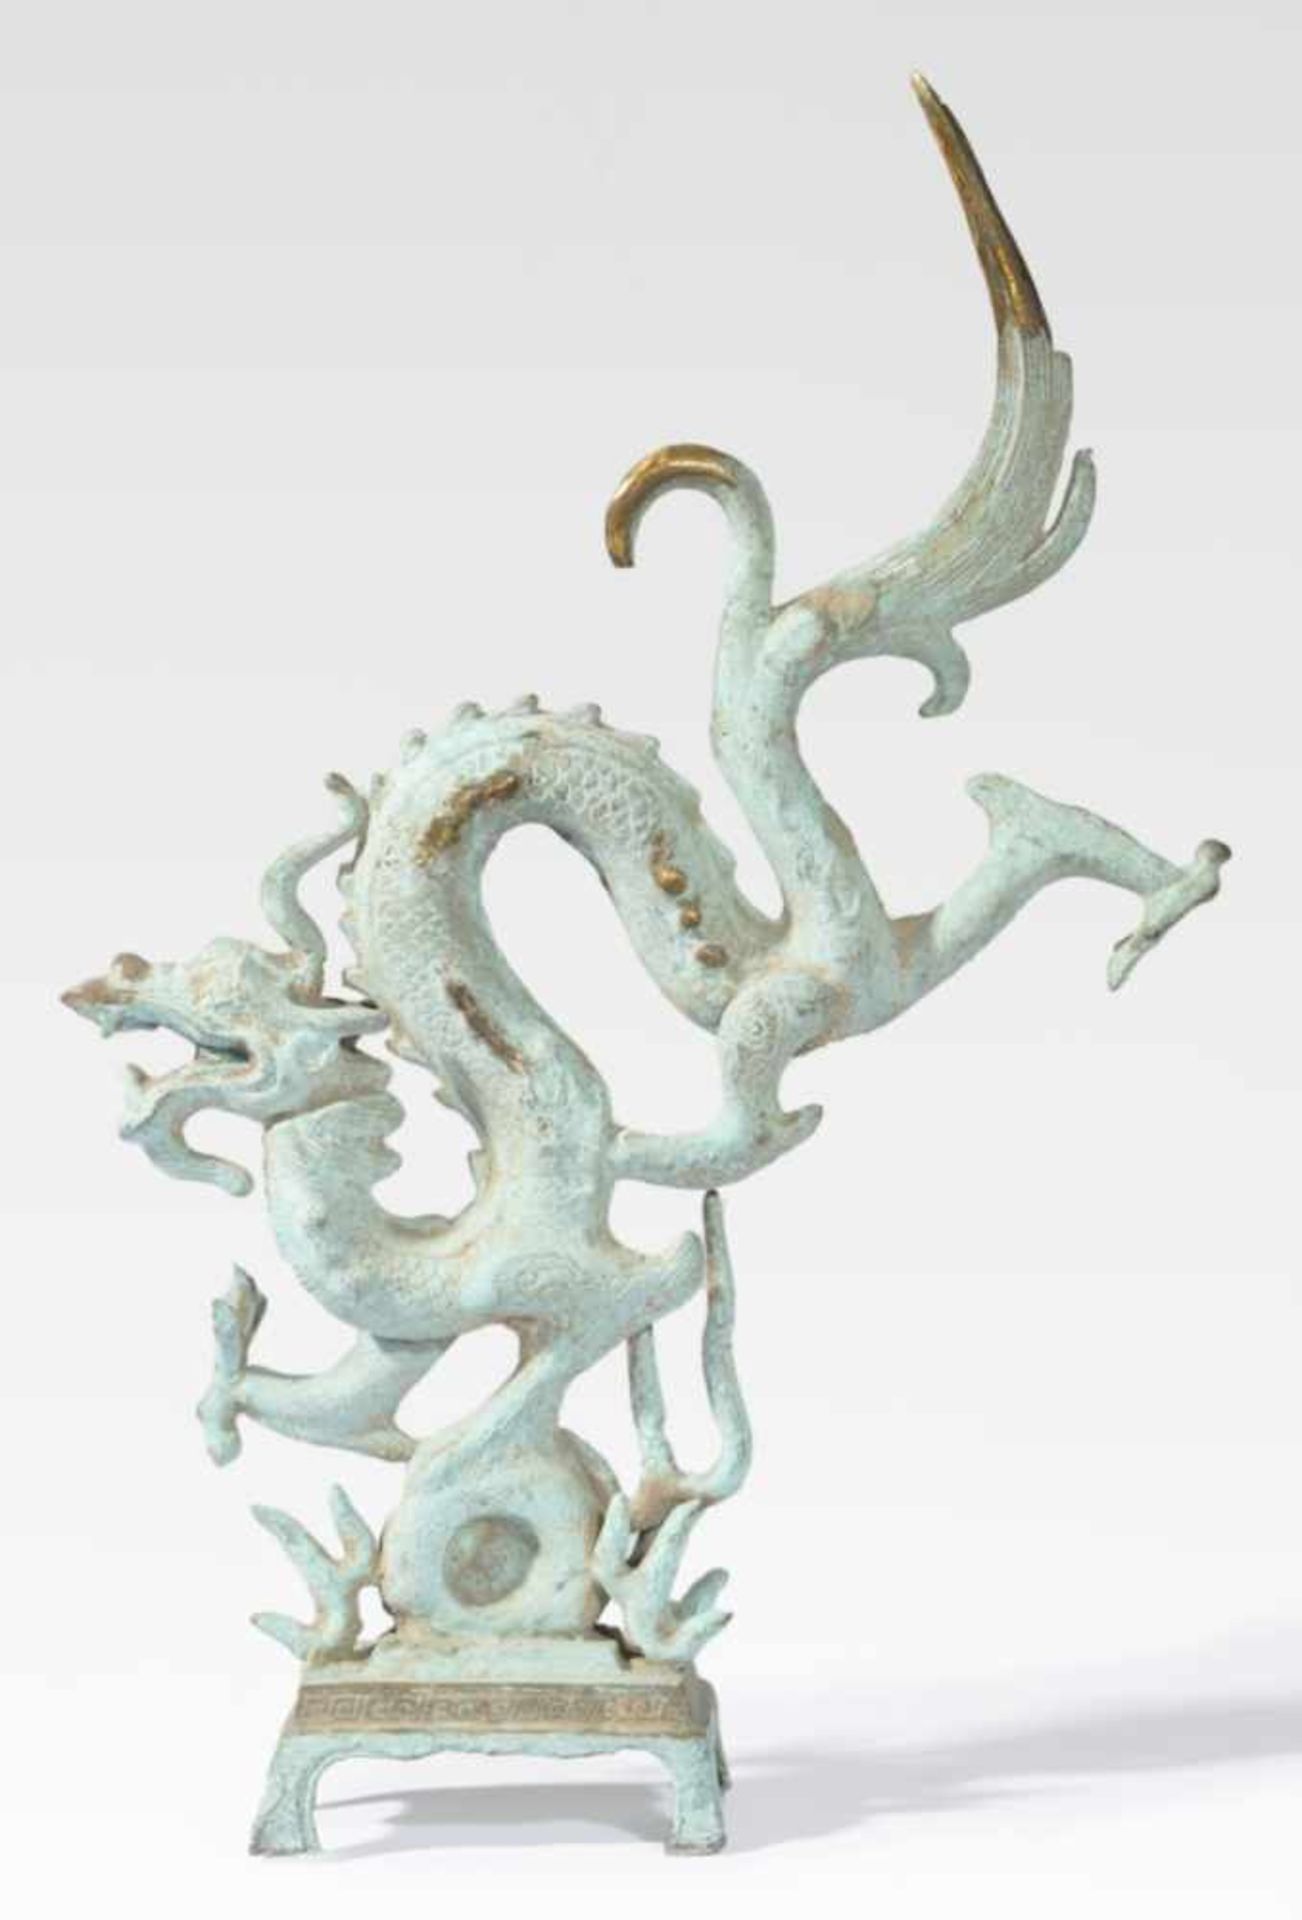 A Large Chinese Bronze Dragon, 20th c., 47 cm high, Provenance: Private collection Zurich